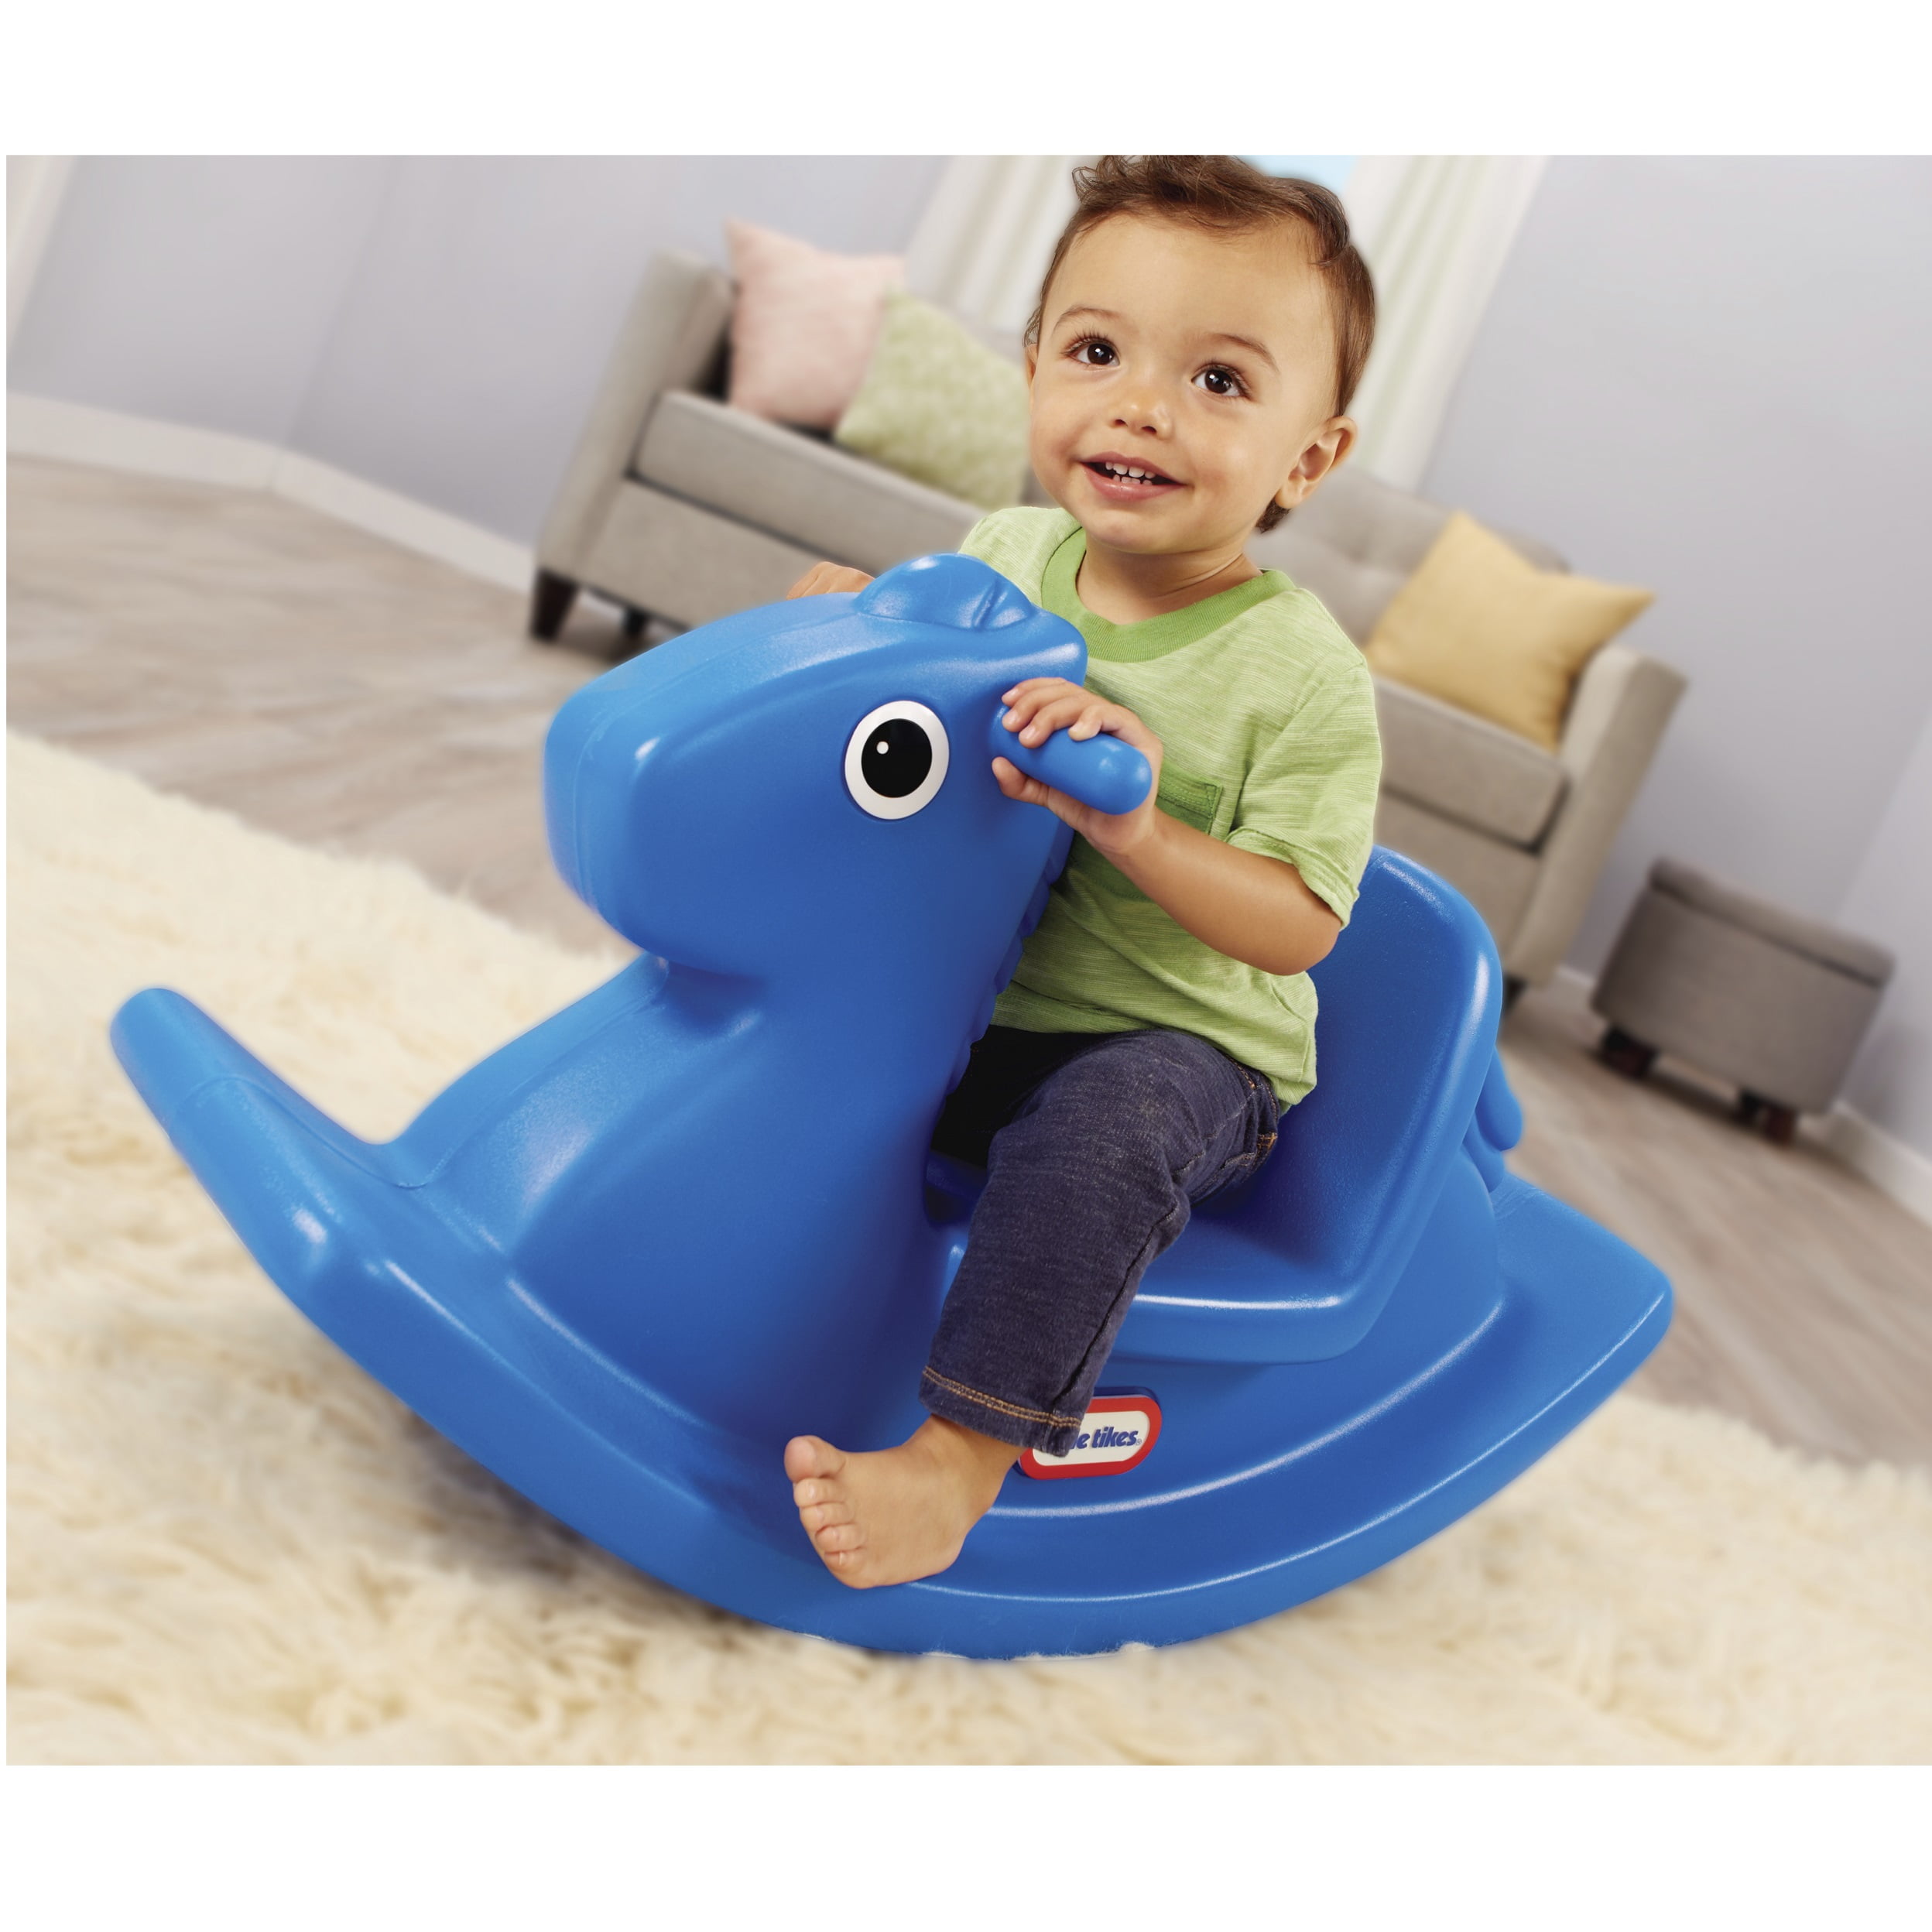 Little Tikes 620171 Outdoor & Indoor Balance Rocking Horse for Toddlers, Blue - 2